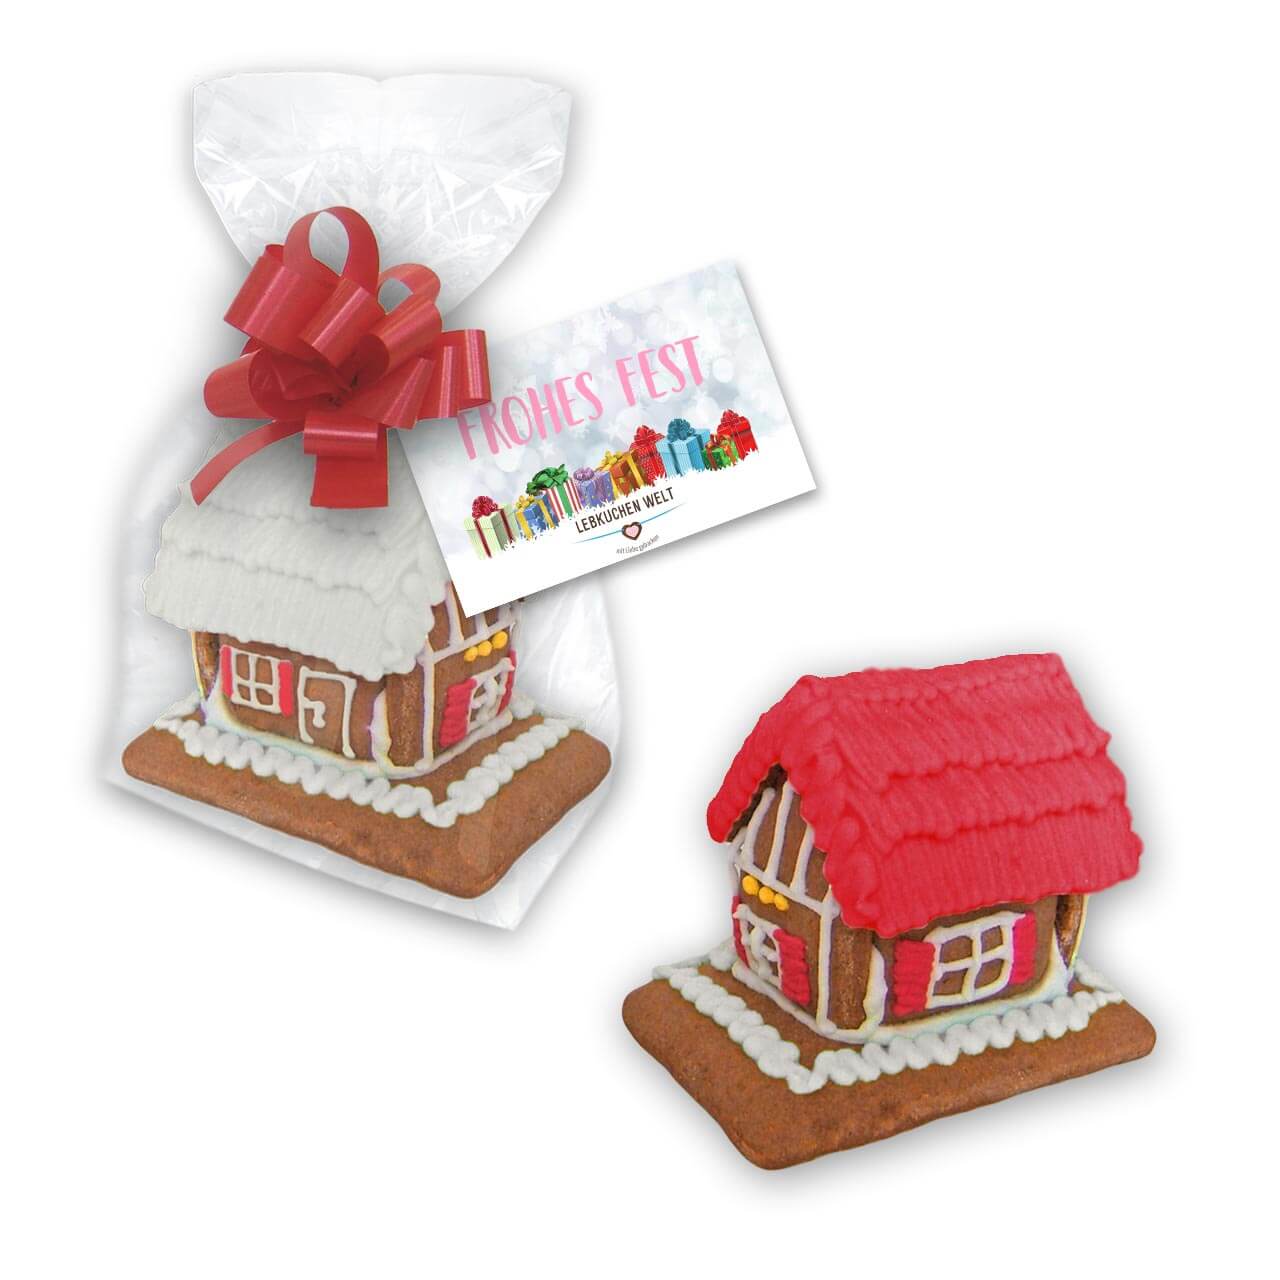 Order mini gingerbread house as christmas present - incl. personalized card